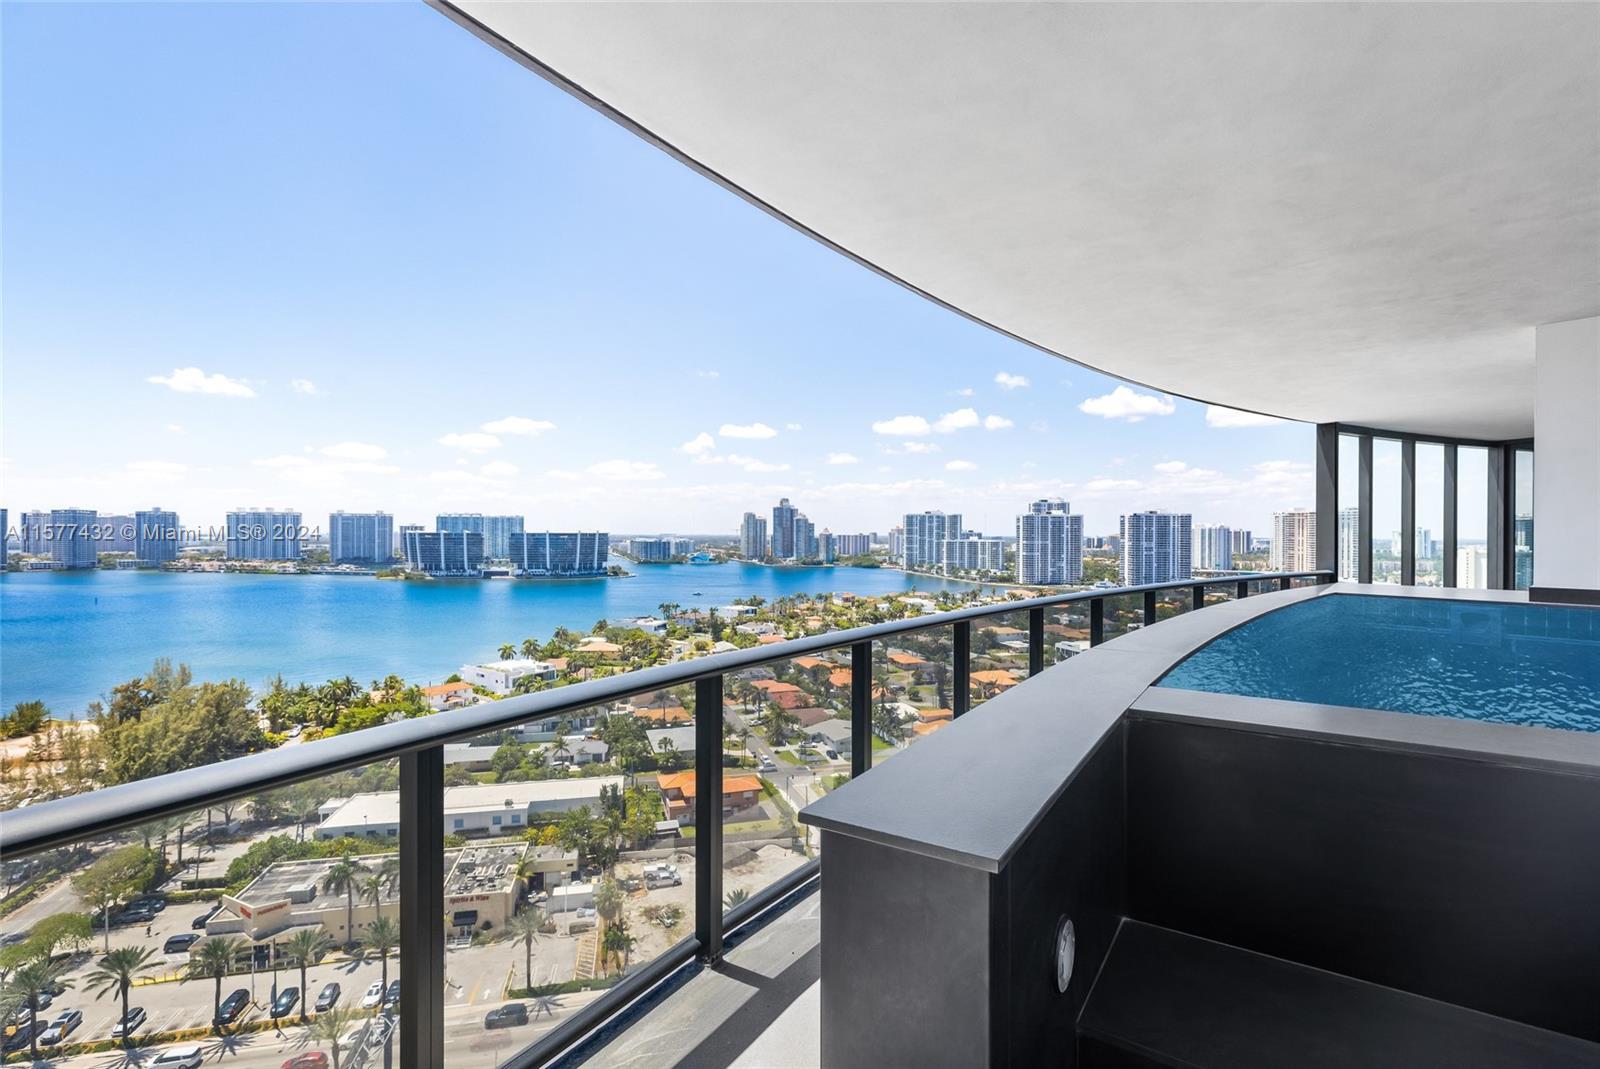 Photo of 18555 Collins Ave #1903 in Sunny Isles Beach, FL